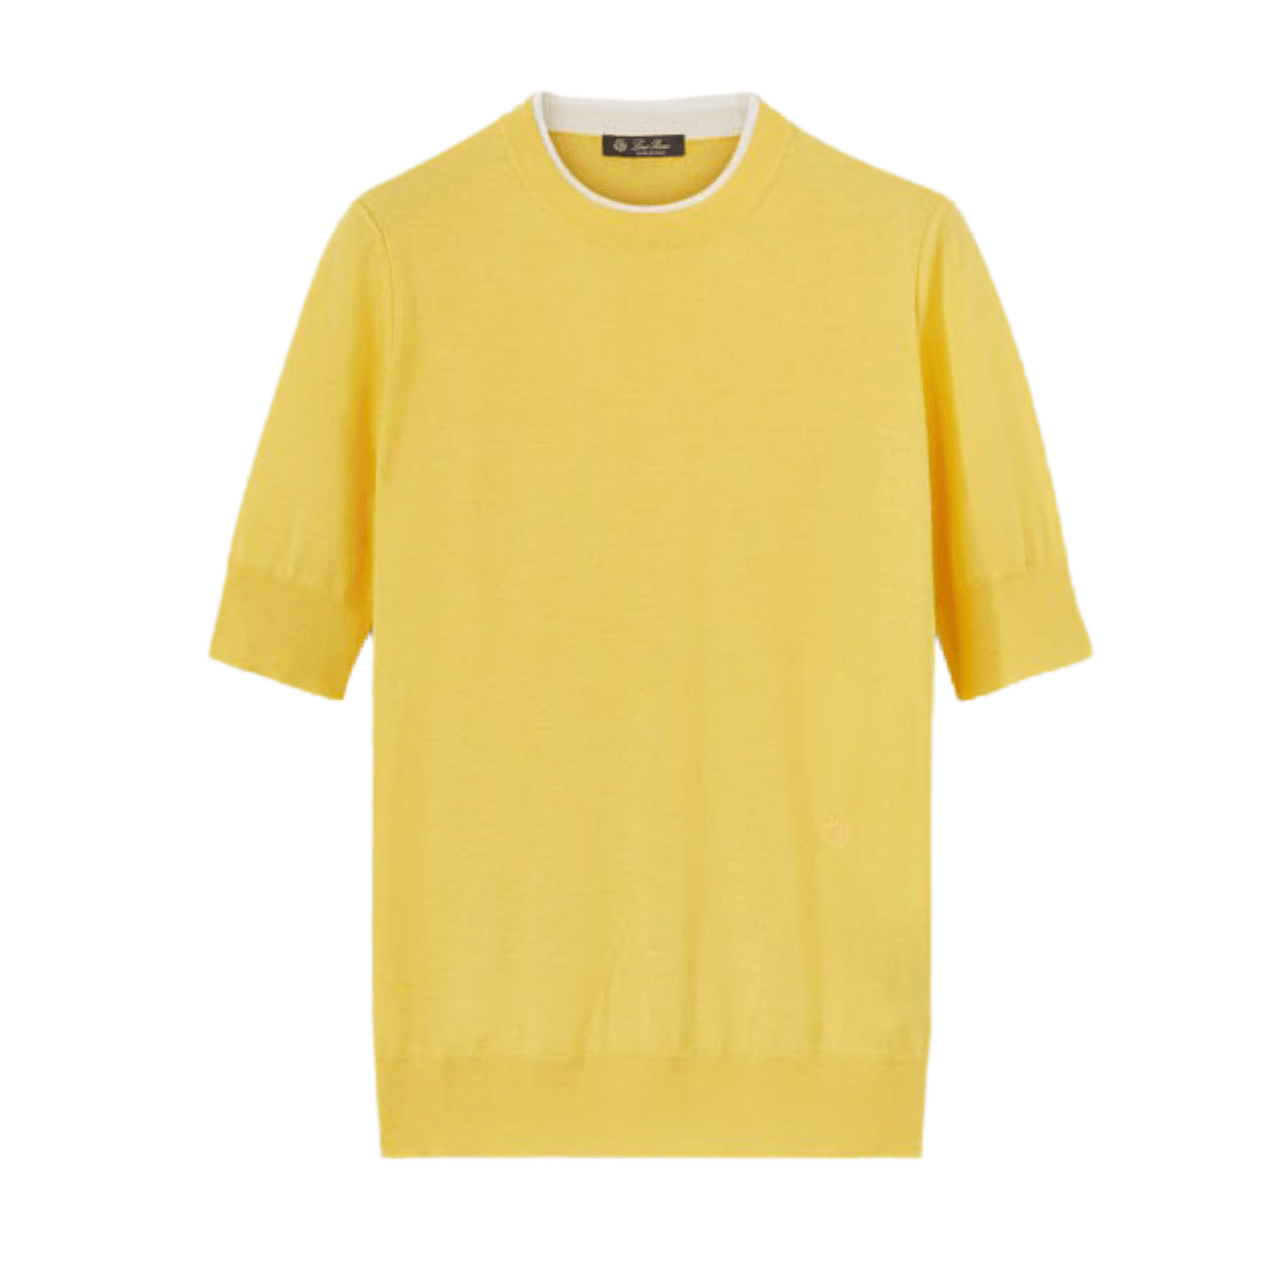 Yellow cashmere short sleeve top